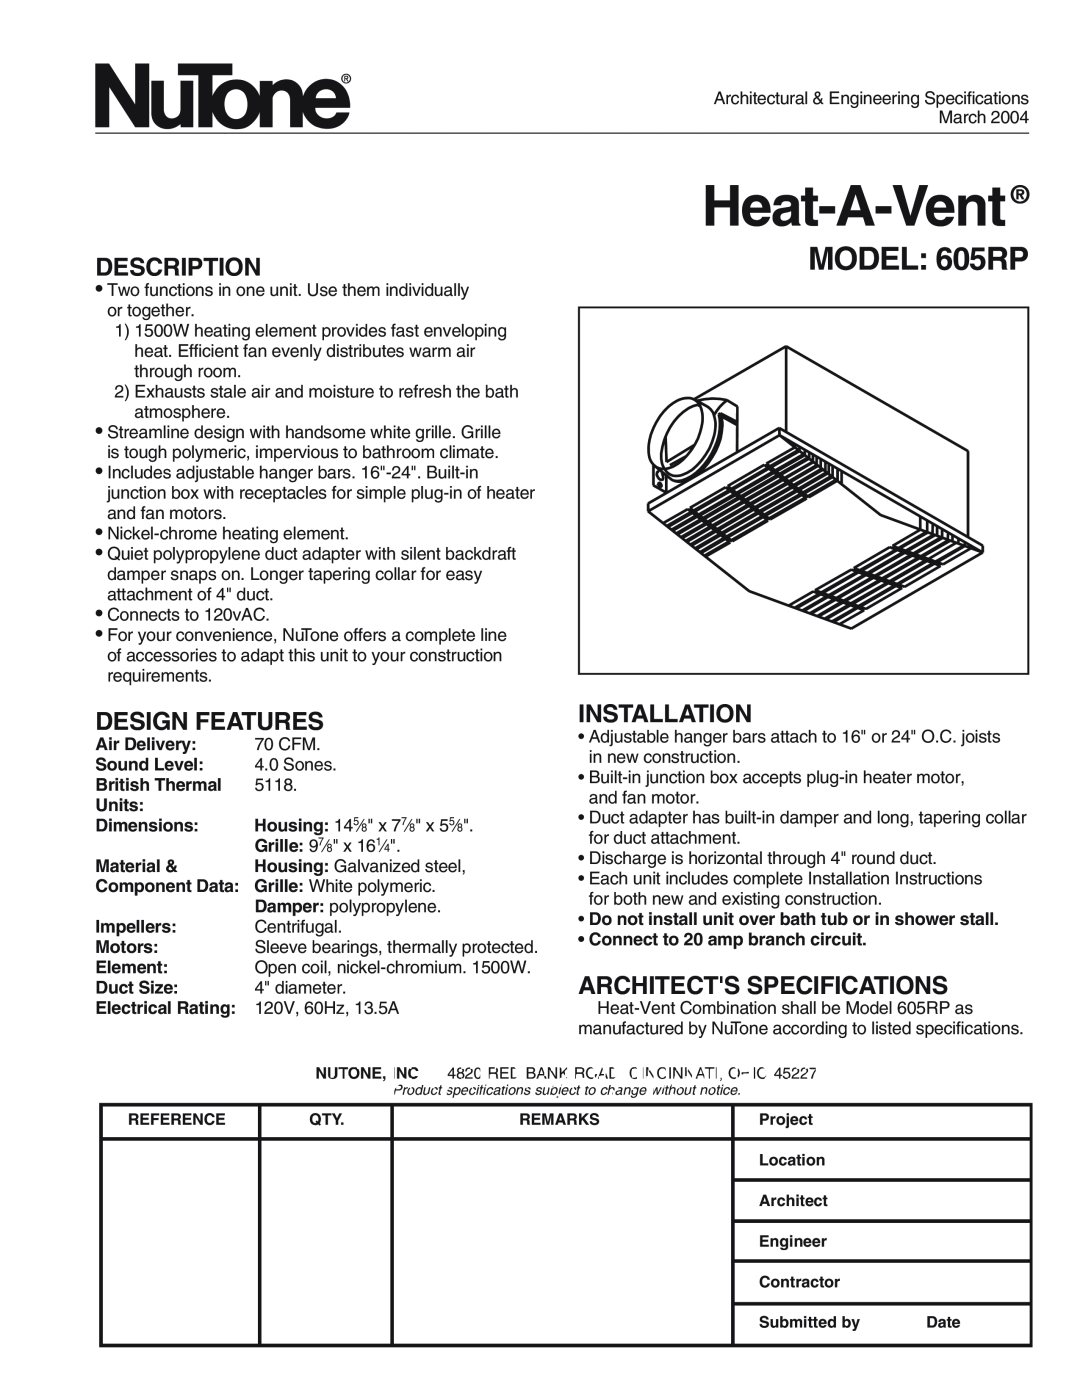 NuTone installation instructions Heat-A-Vent Combination, MODEL 605RP, Location, Mounting Heater Housing 